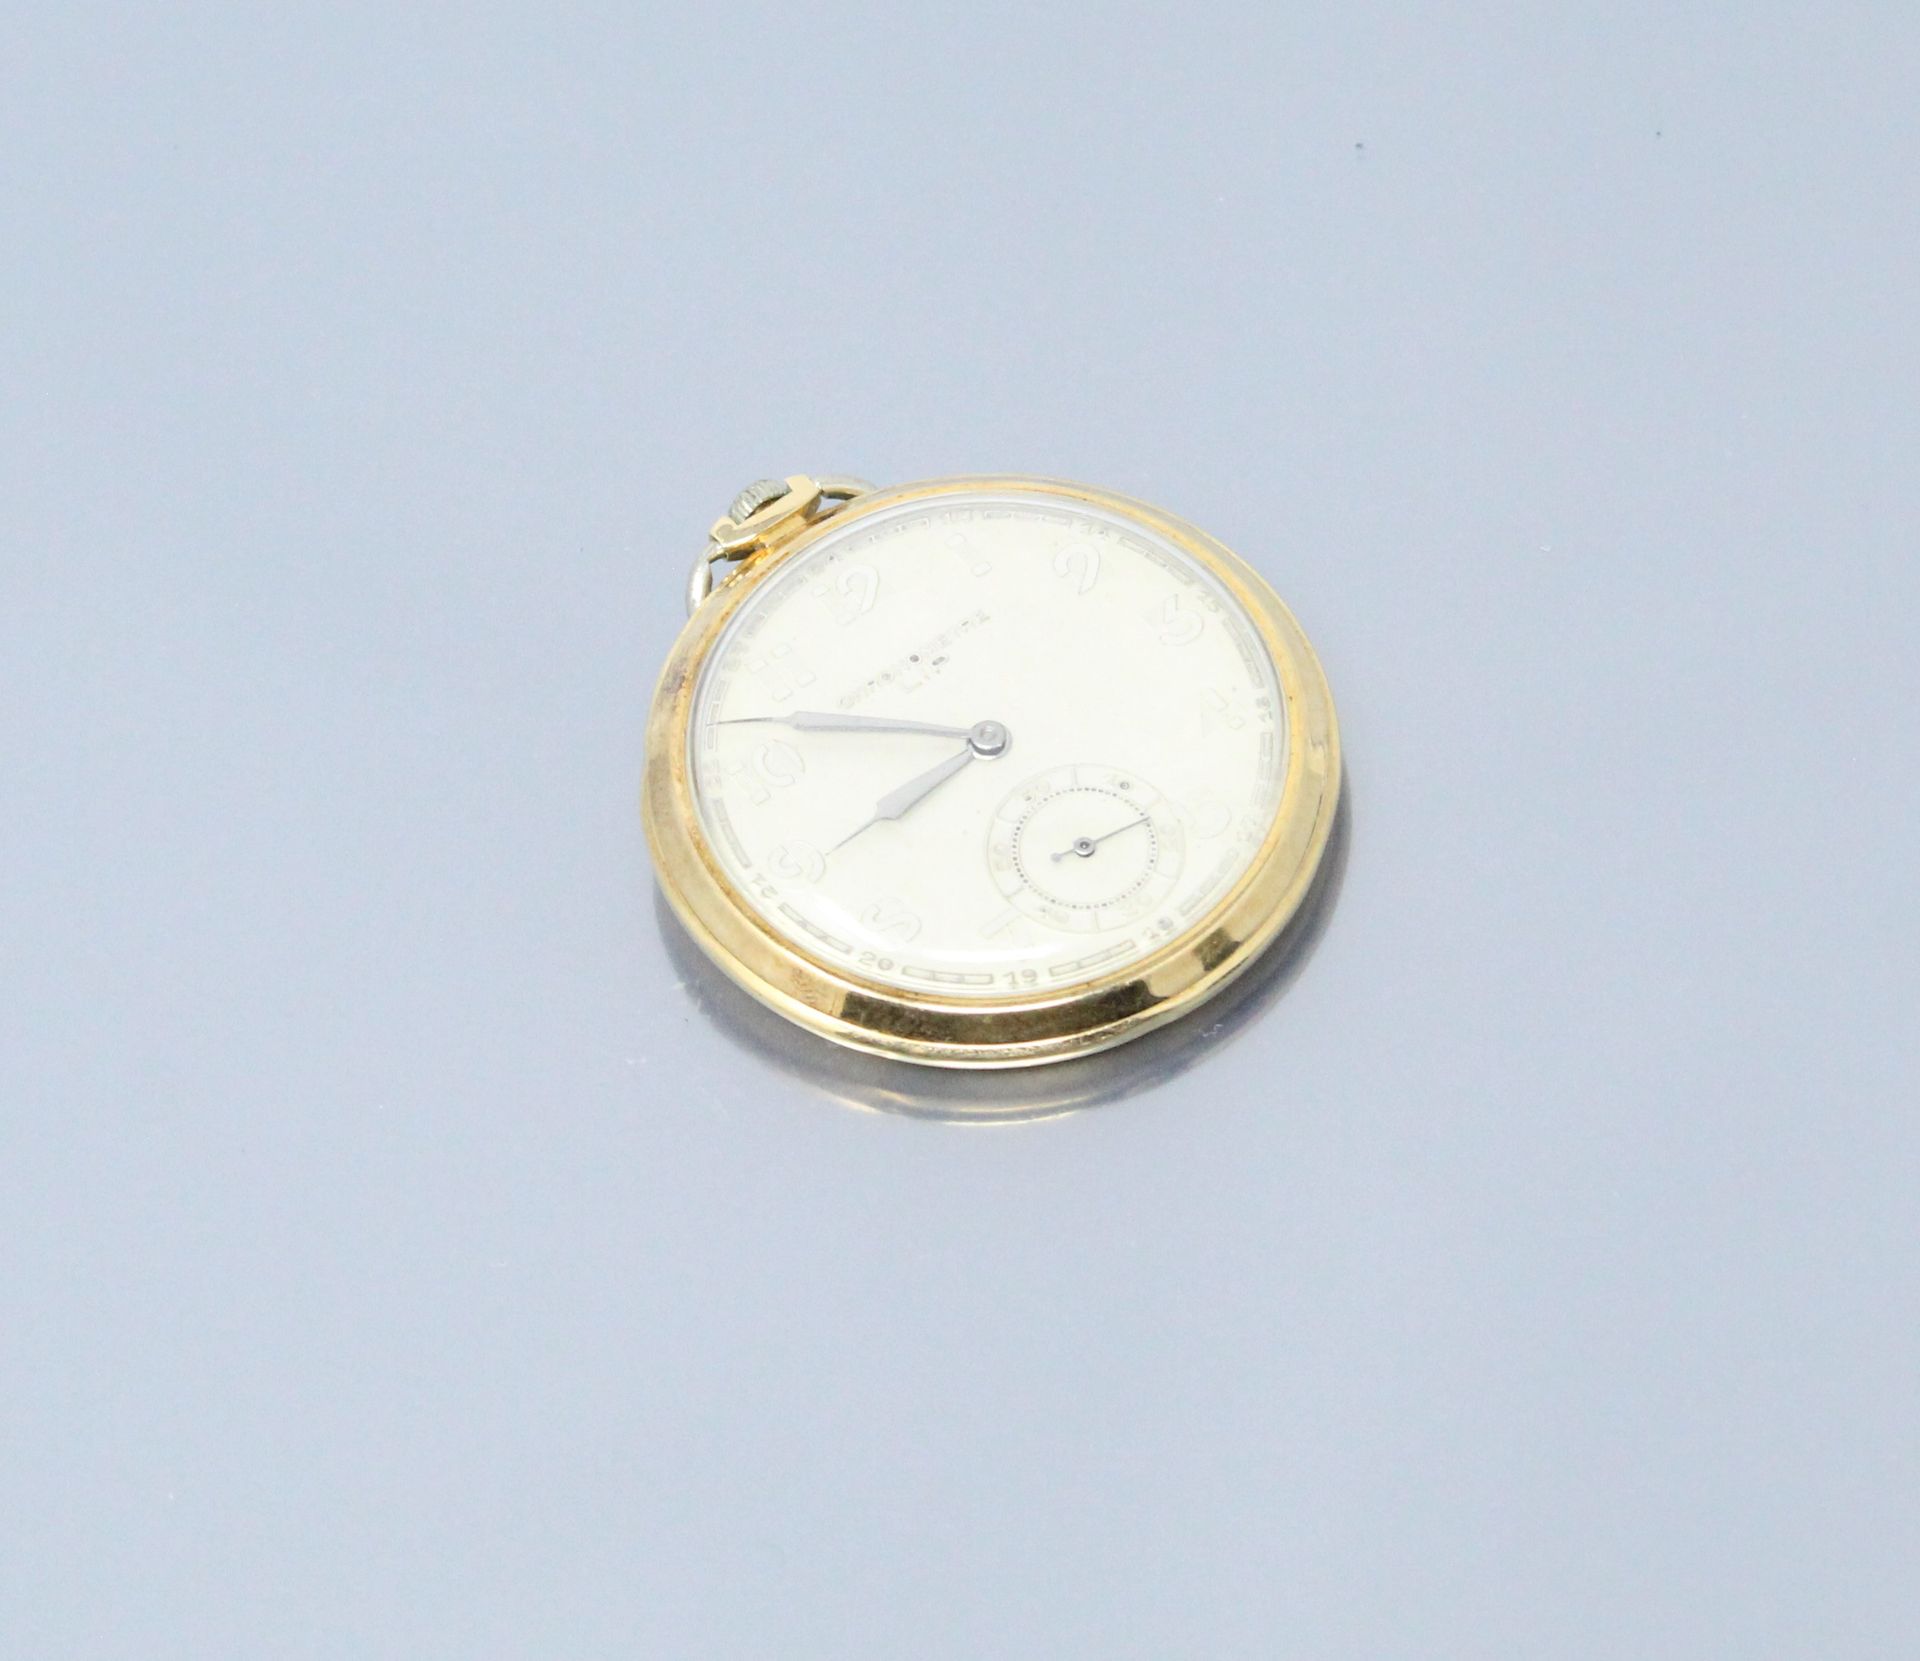 Null LIP

18k (750) yellow gold pocket watch, cream dial with Arabic numerals. S&hellip;